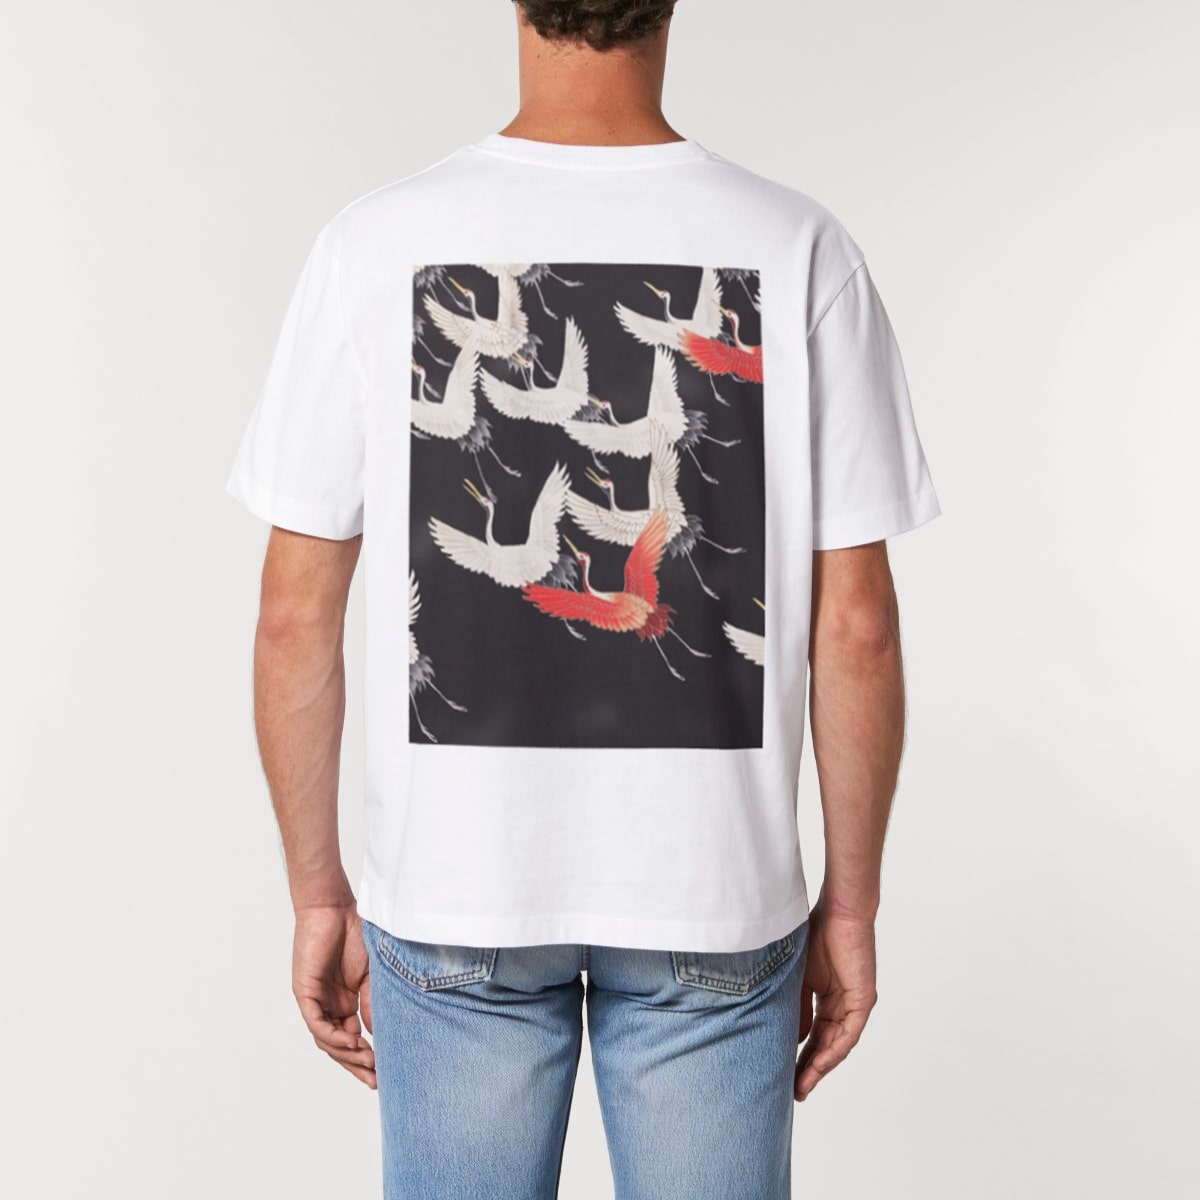 SWAN SYNPHONY T-SHIRT